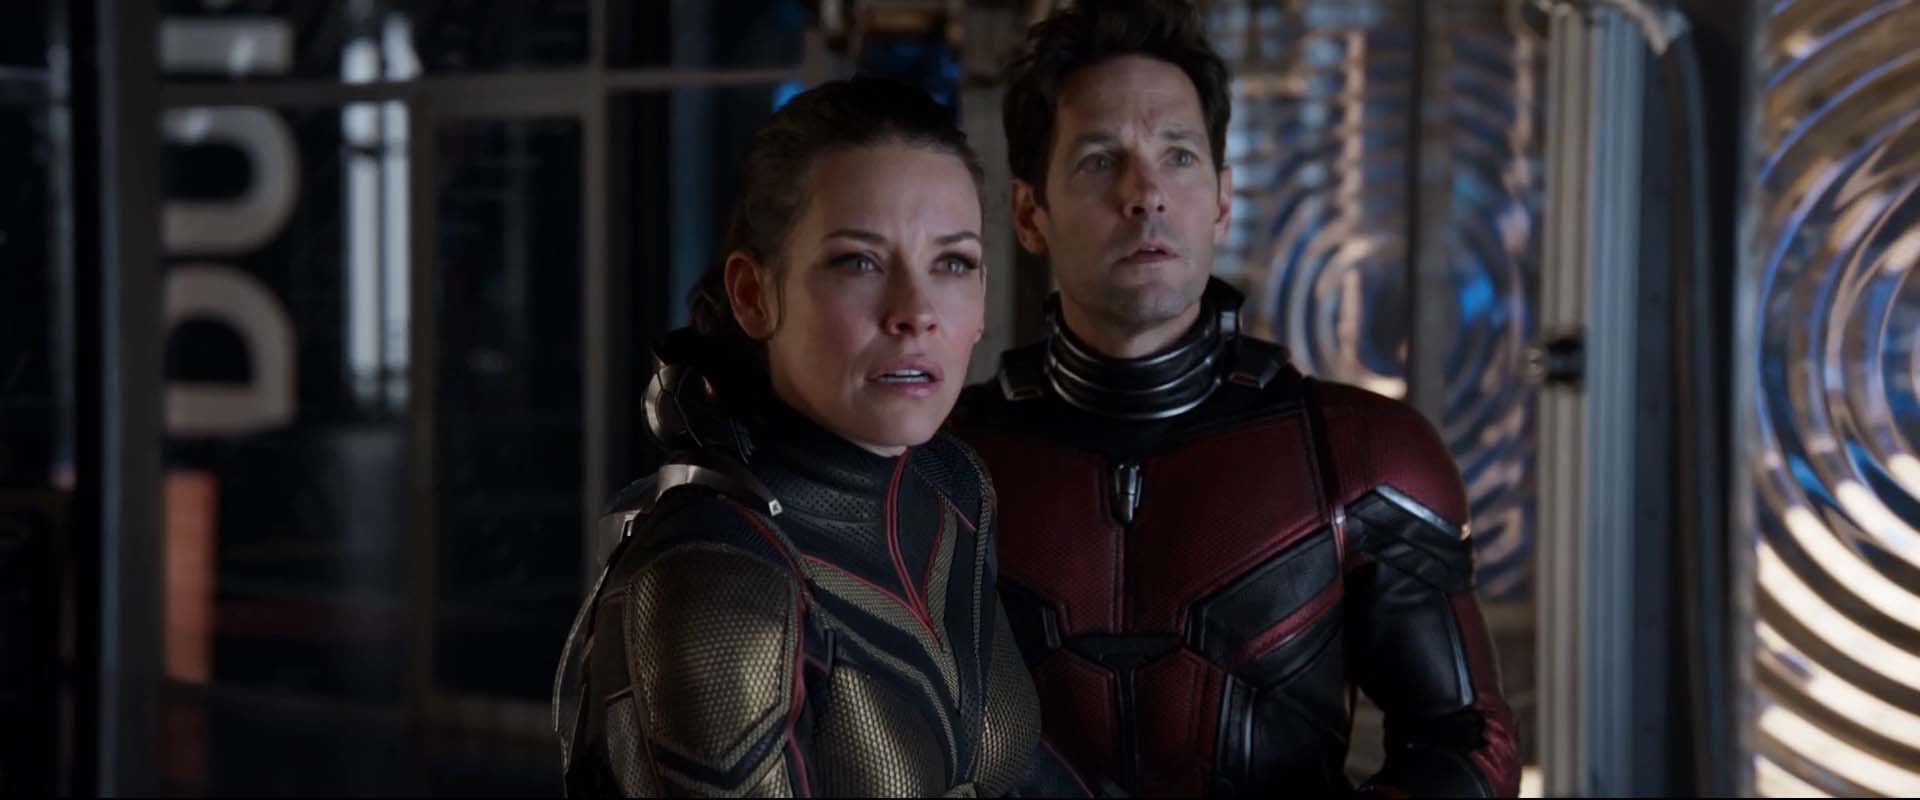 Here's what the critics are saying about Ant-Man and the Wasp